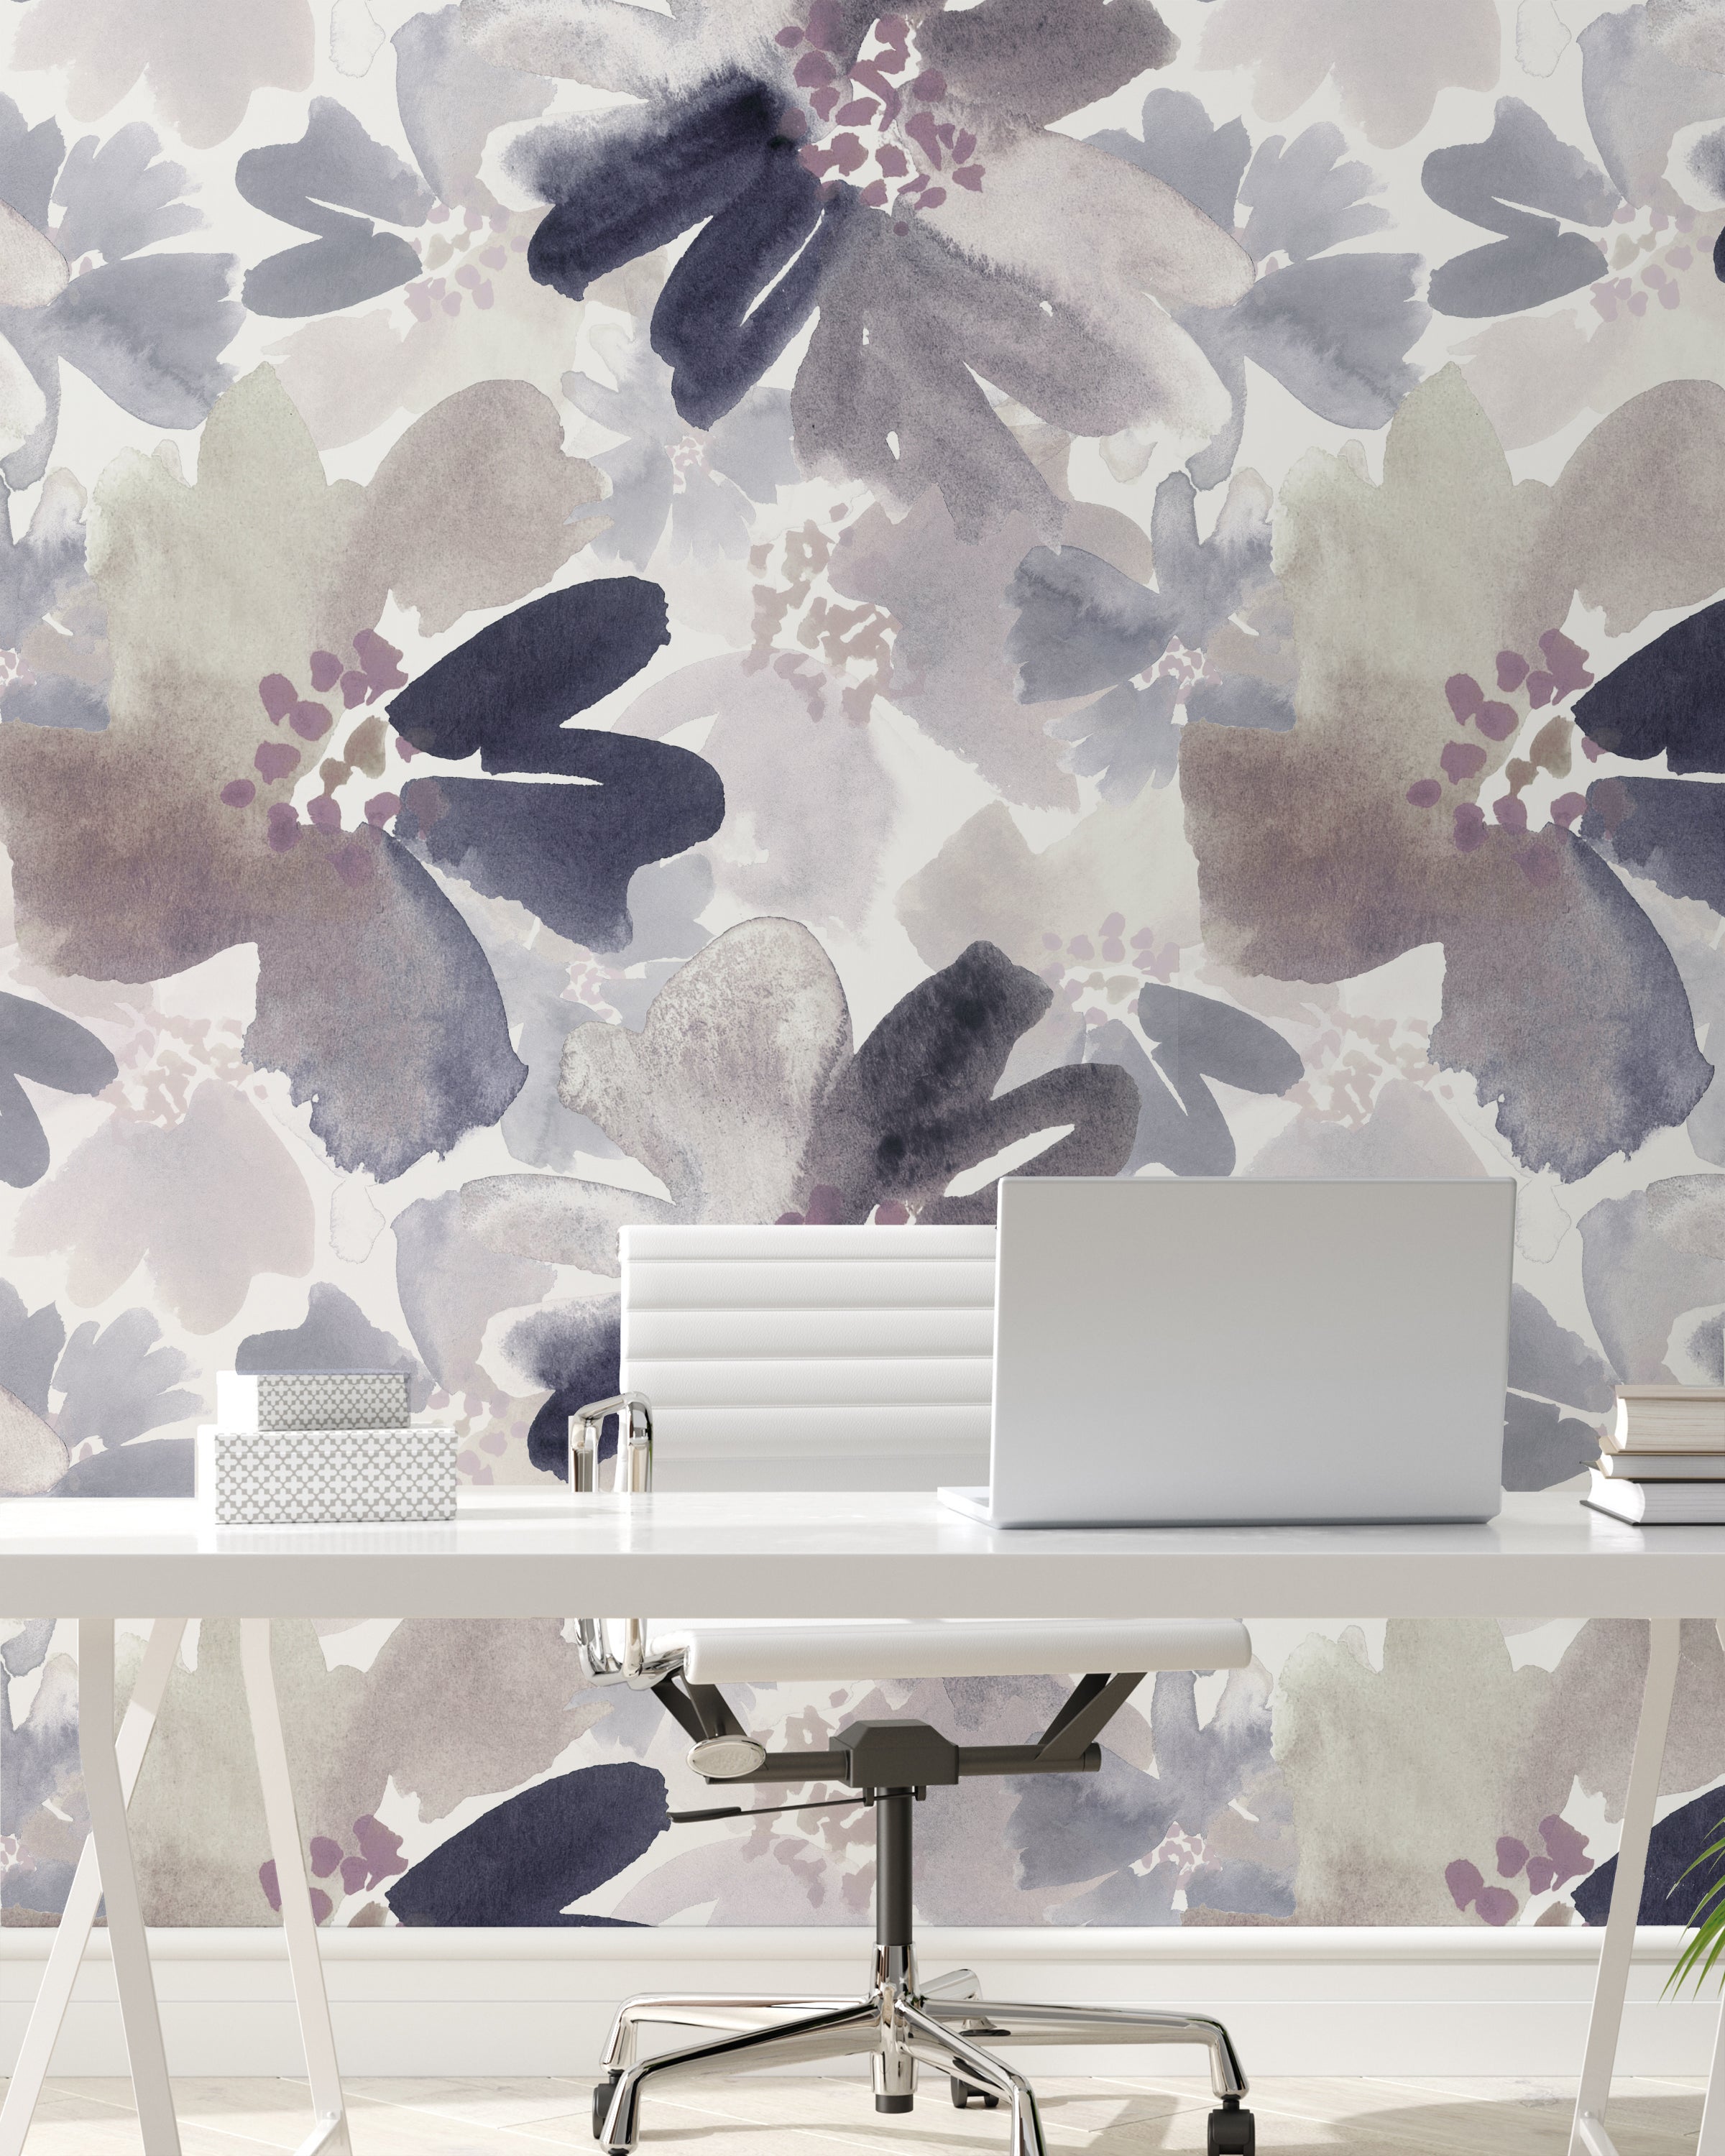 A modern office setting featuring Purple Passion Wallpaper, which showcases large, abstract floral designs in shades of purple, grey, and white. The wallpaper creates a dynamic backdrop for a minimalist white desk with a laptop, enhancing the workspace with a touch of creative flair.